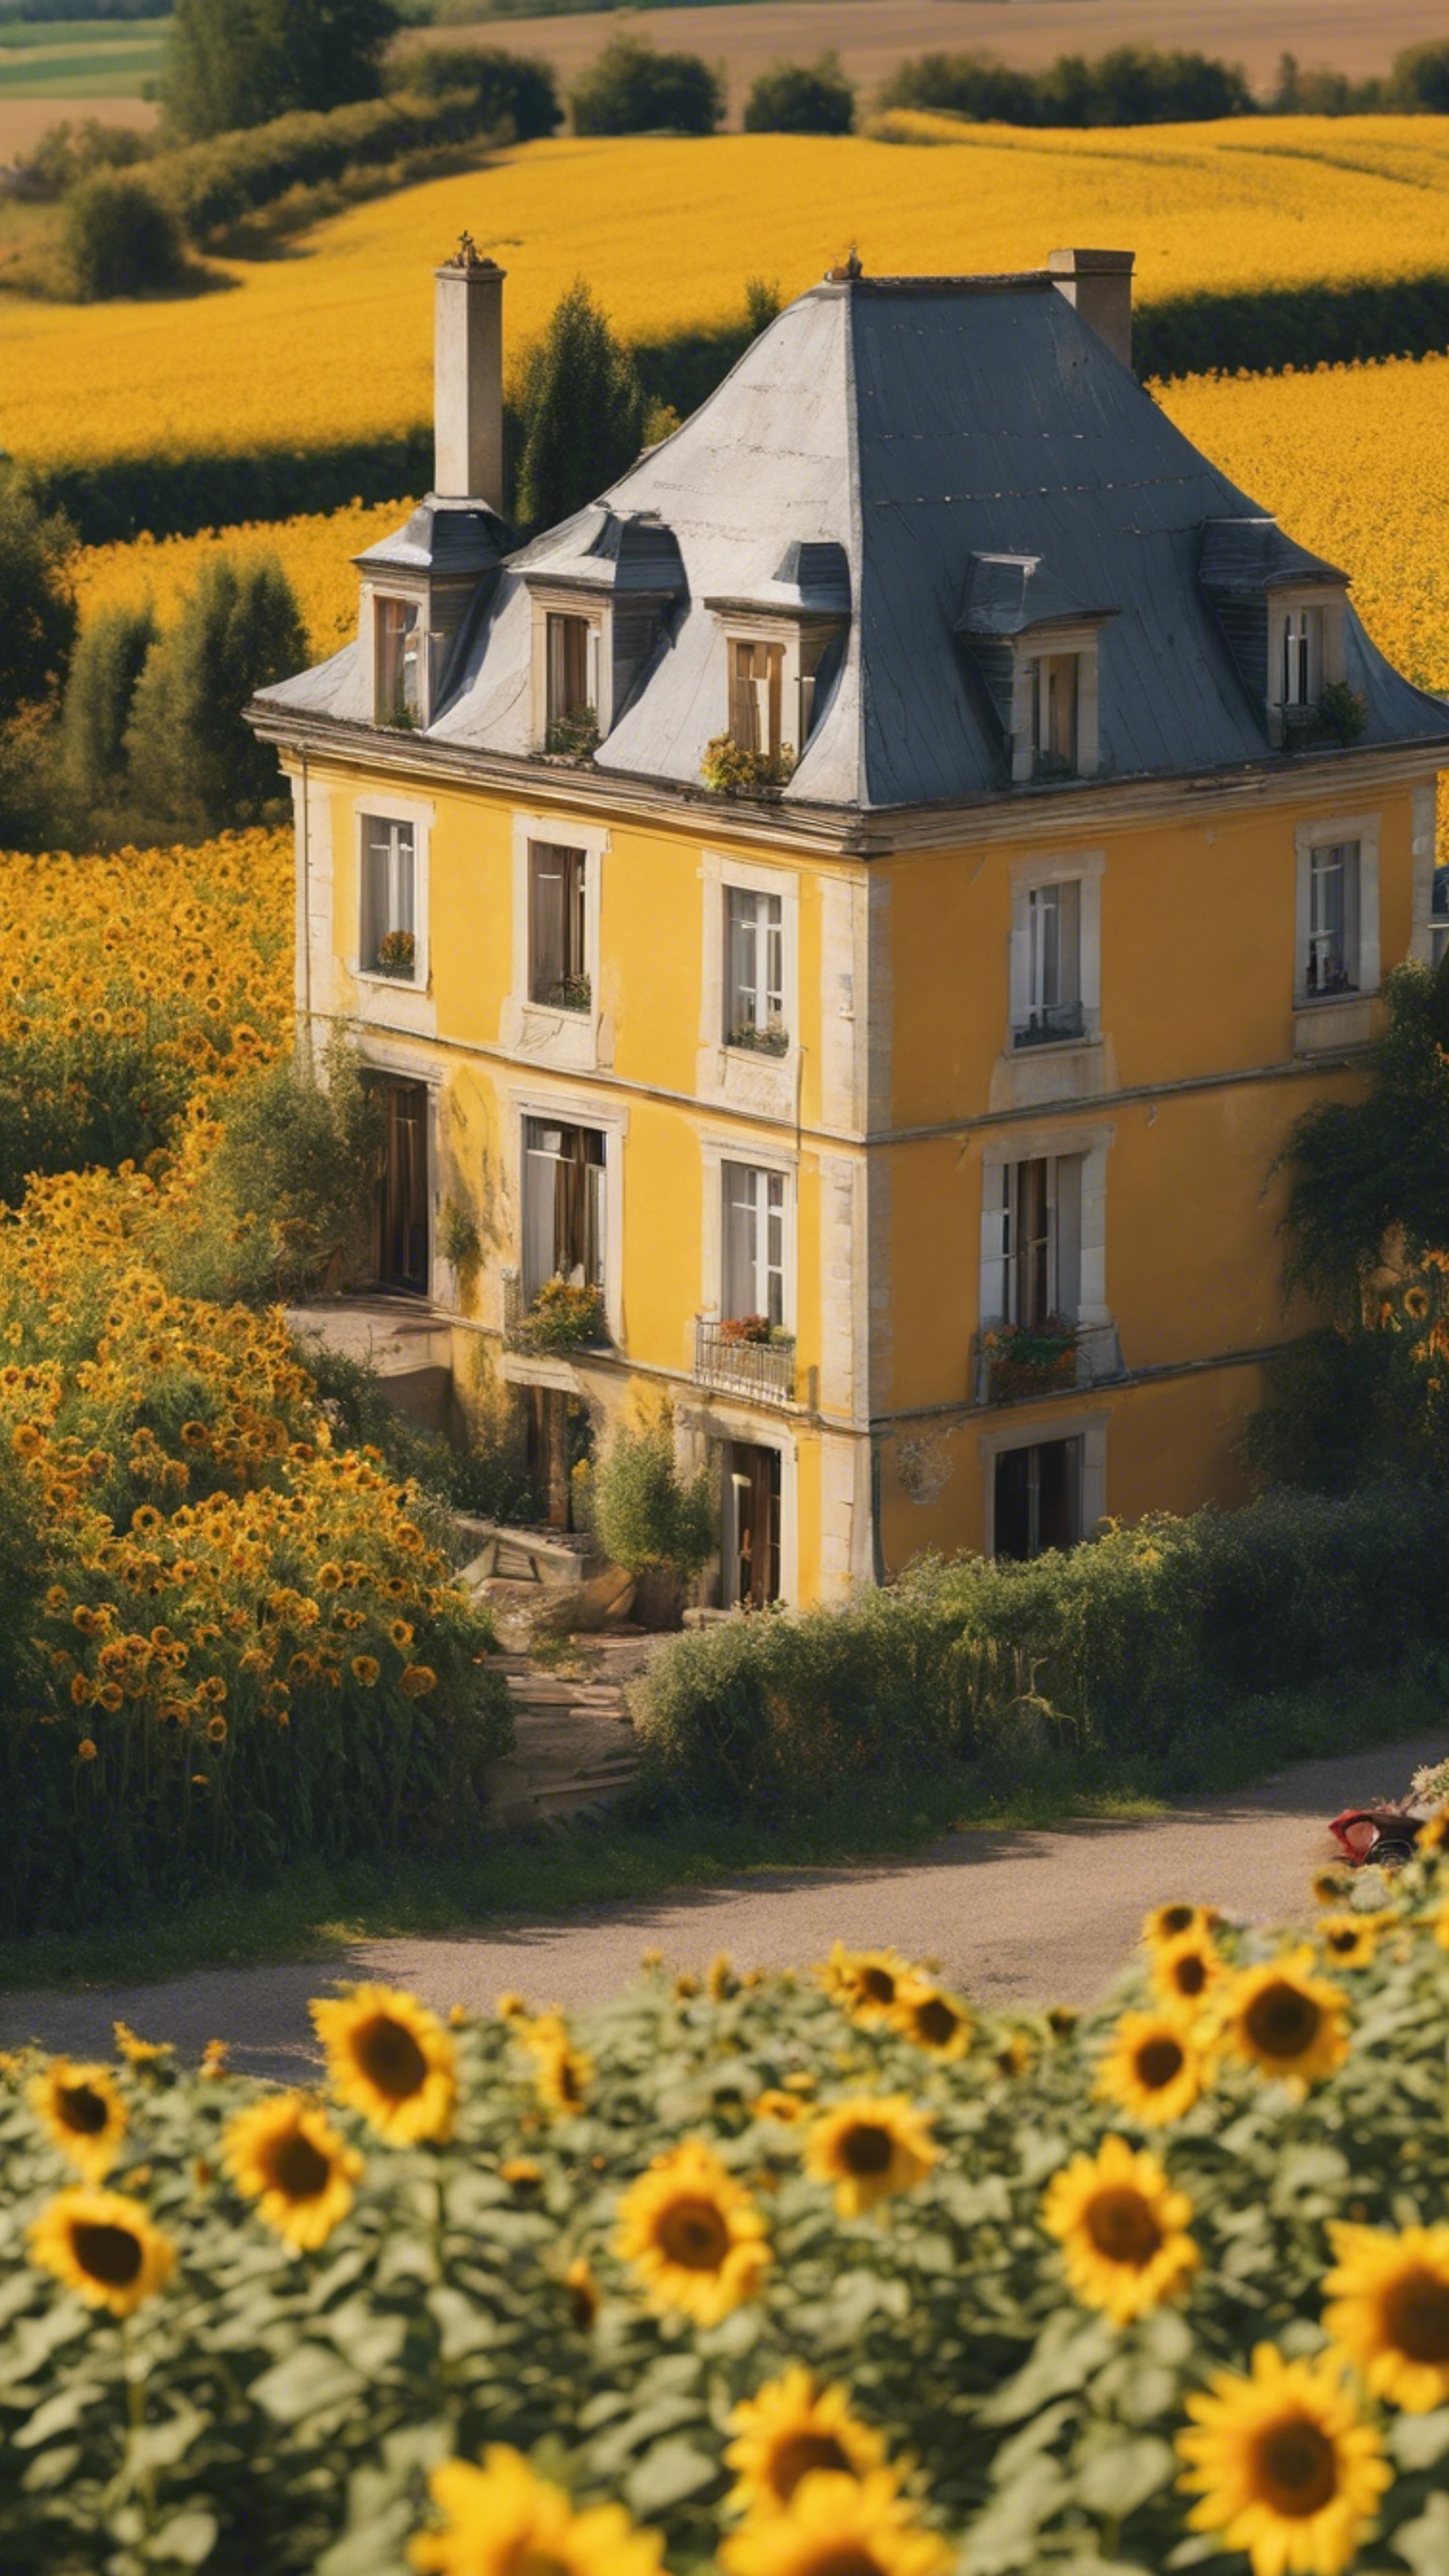 A quaint French country house nestled in a field of bright yellow sunflowers during a sunny afternoon. Fondo de pantalla[7540a515ea0143d58f51]